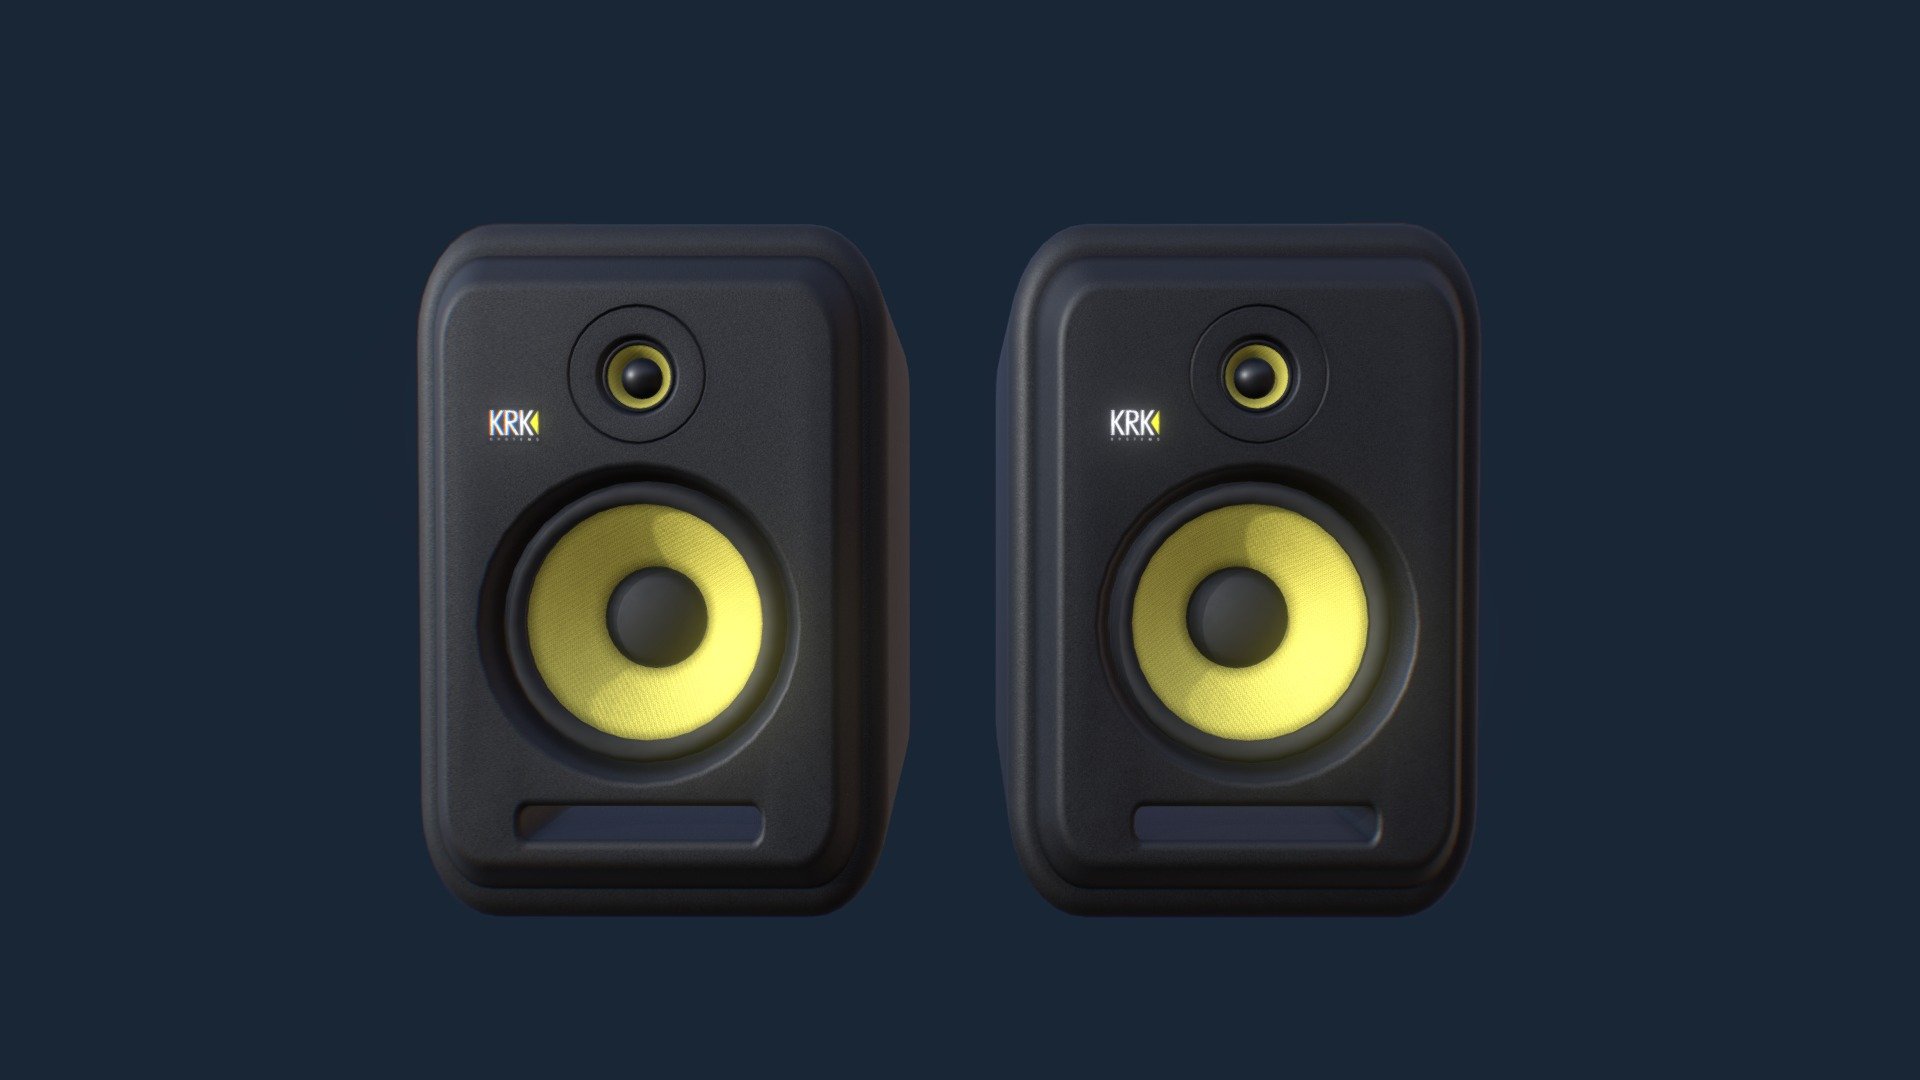 Half of the Type Beats that you hear on youtube, were probably made using these monitors.

Left &amp; Right KRK Studio Monitor Speakers.
lo-poly as i could manage, Still learning &amp; the topology is not perfect.

Modeled in Blender, textured in Substance.
KRK Logo &amp; Rockstar Logos owned by their respective brands 3d model